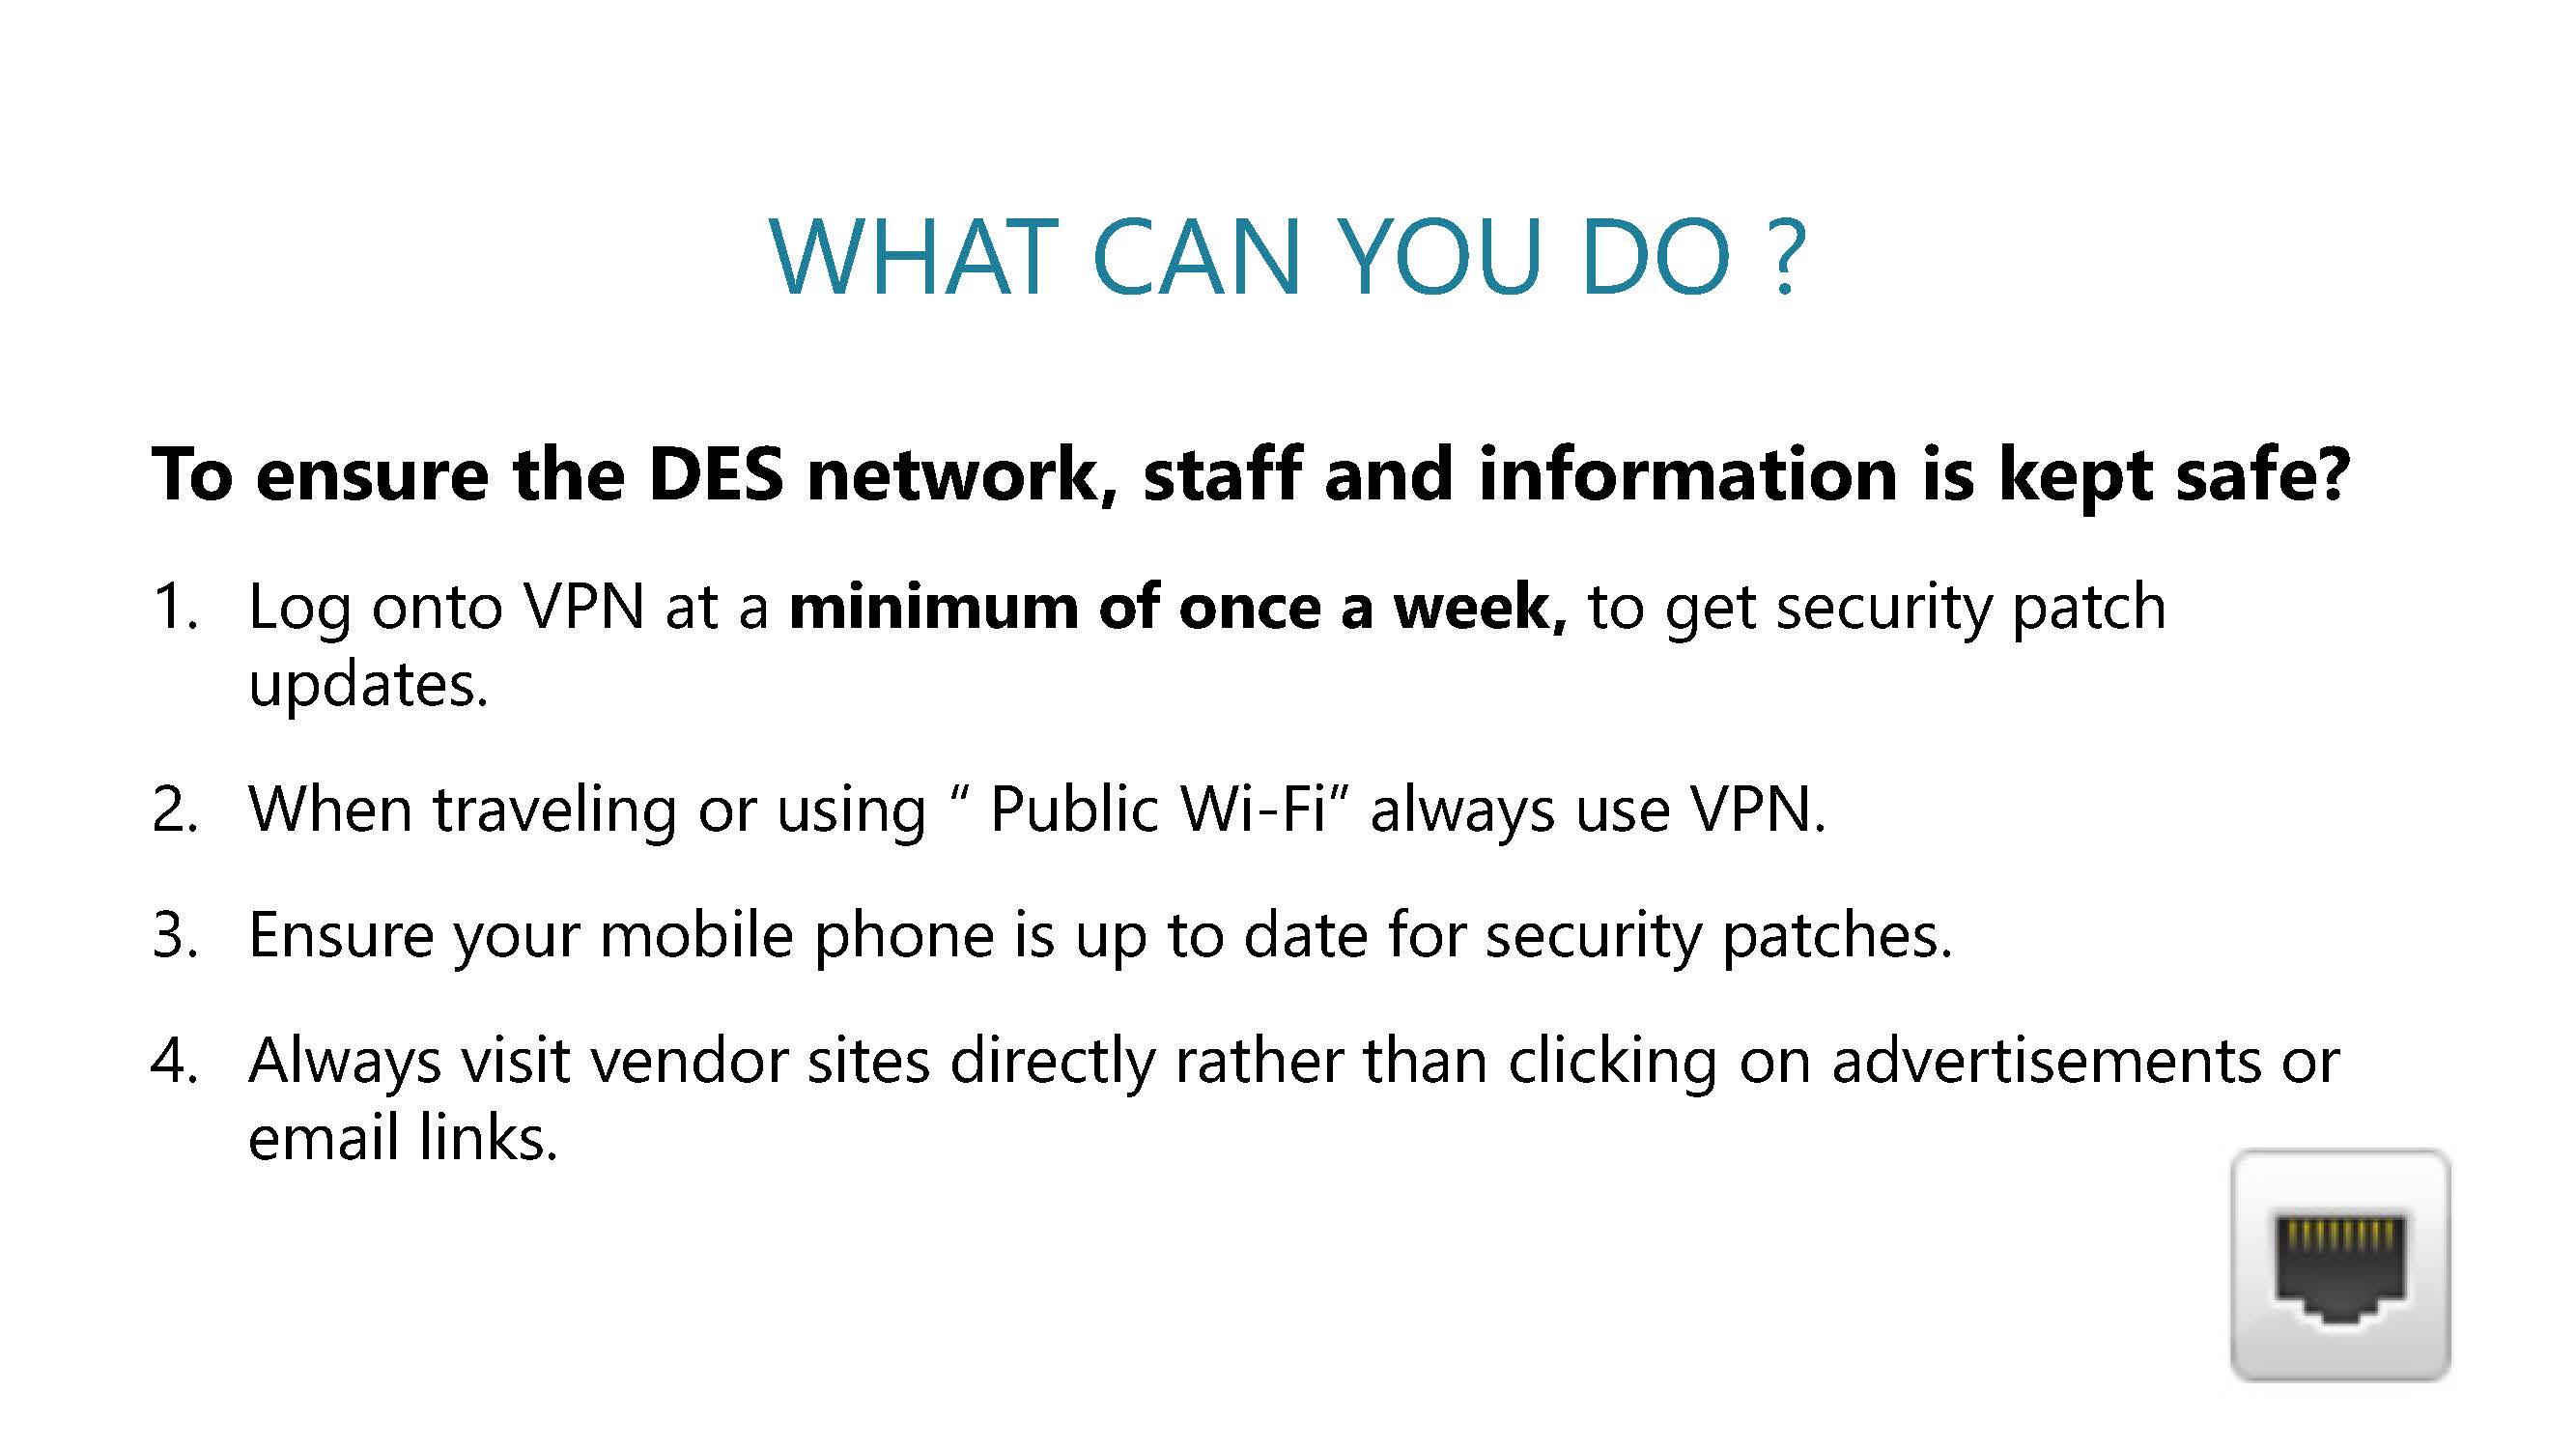 TechTalk_Security in the World today (002)_Page_30.jpg